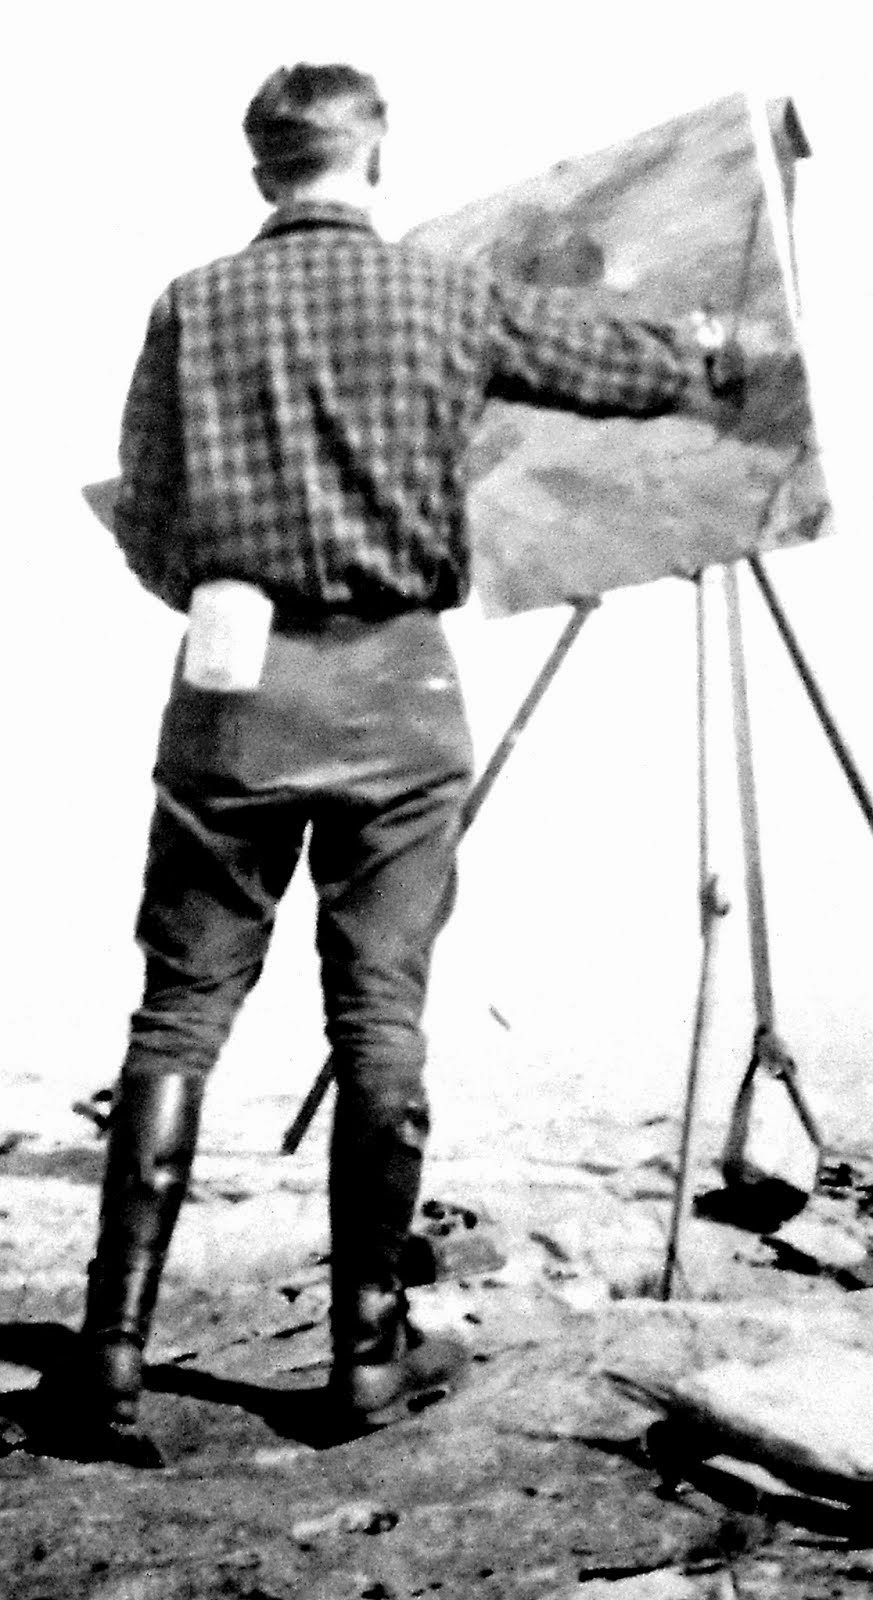 Wilimovsky at Work in the Early 1900s